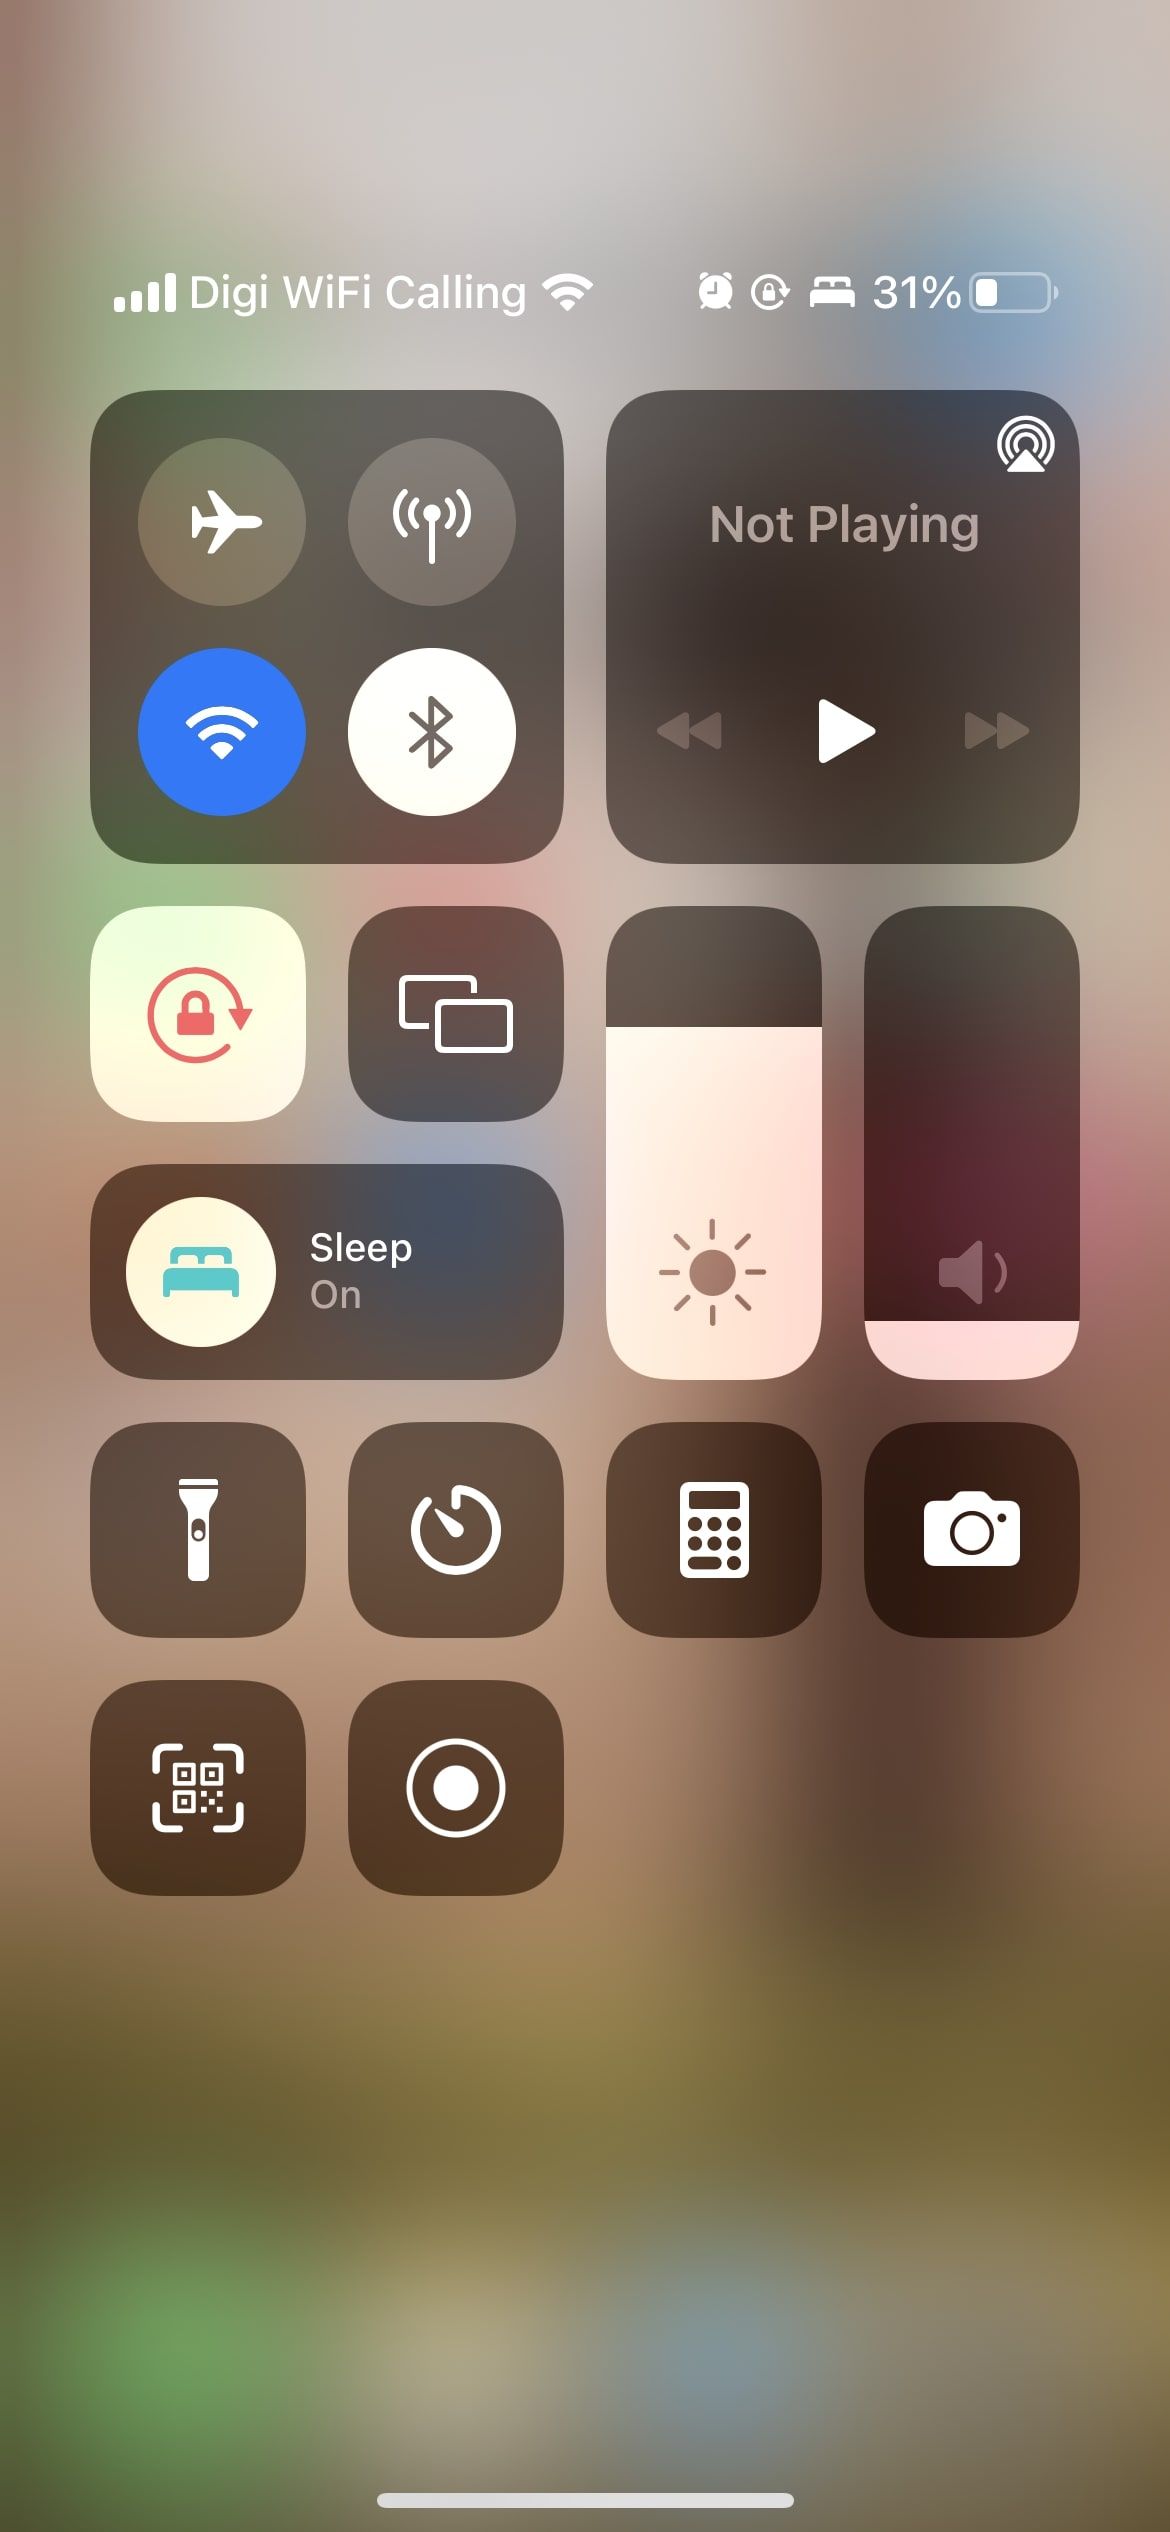 sleep mode turned on in iphone control center 